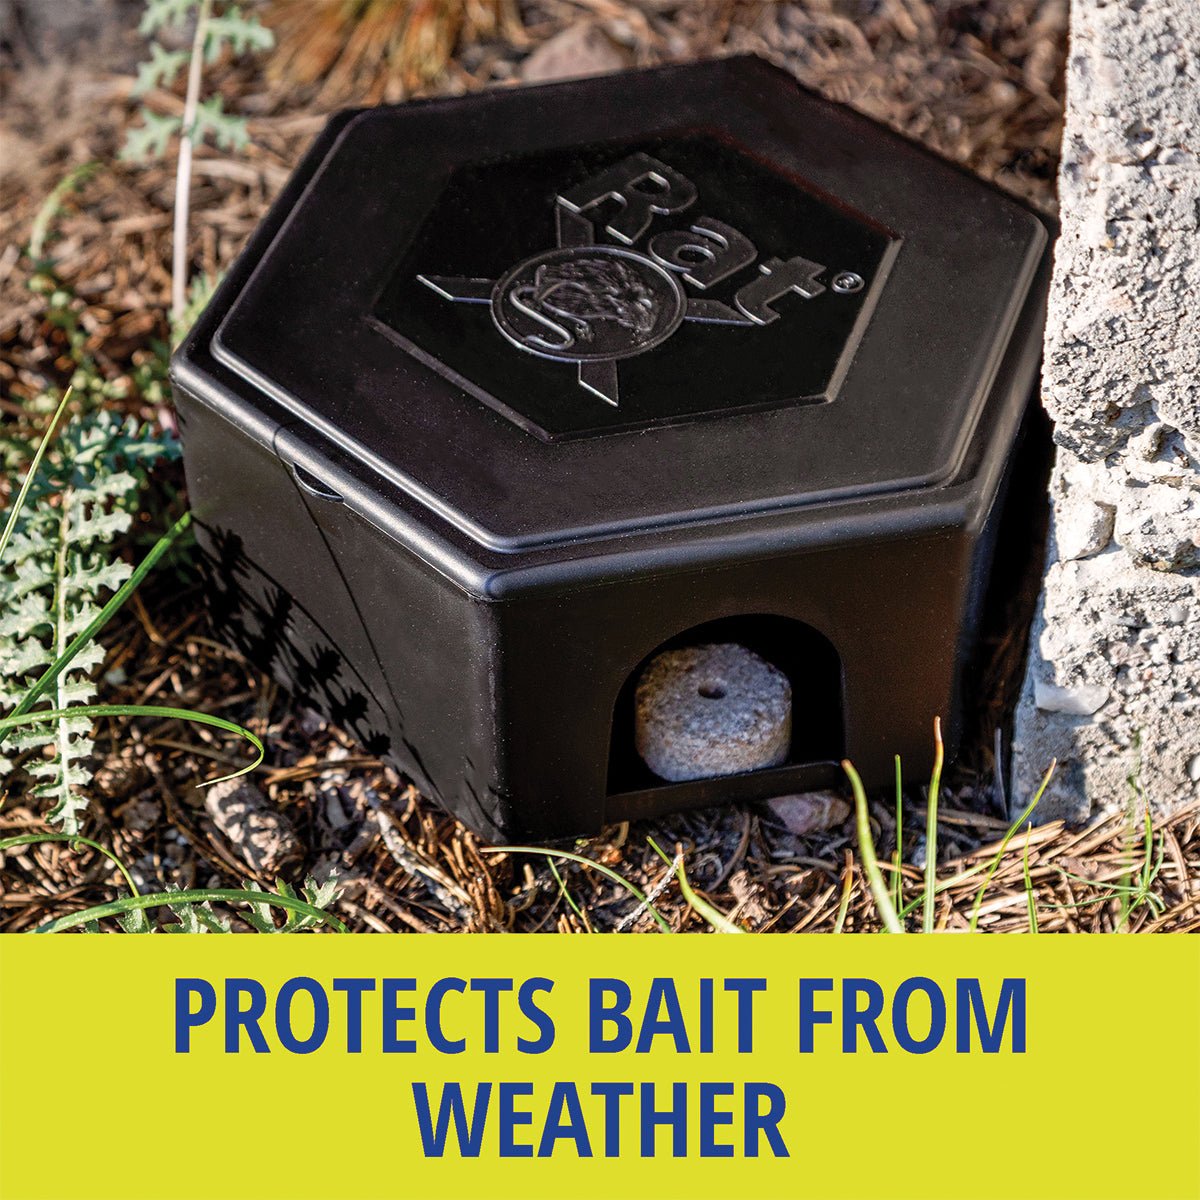 RatX® Small Bait Box protects bait from weather